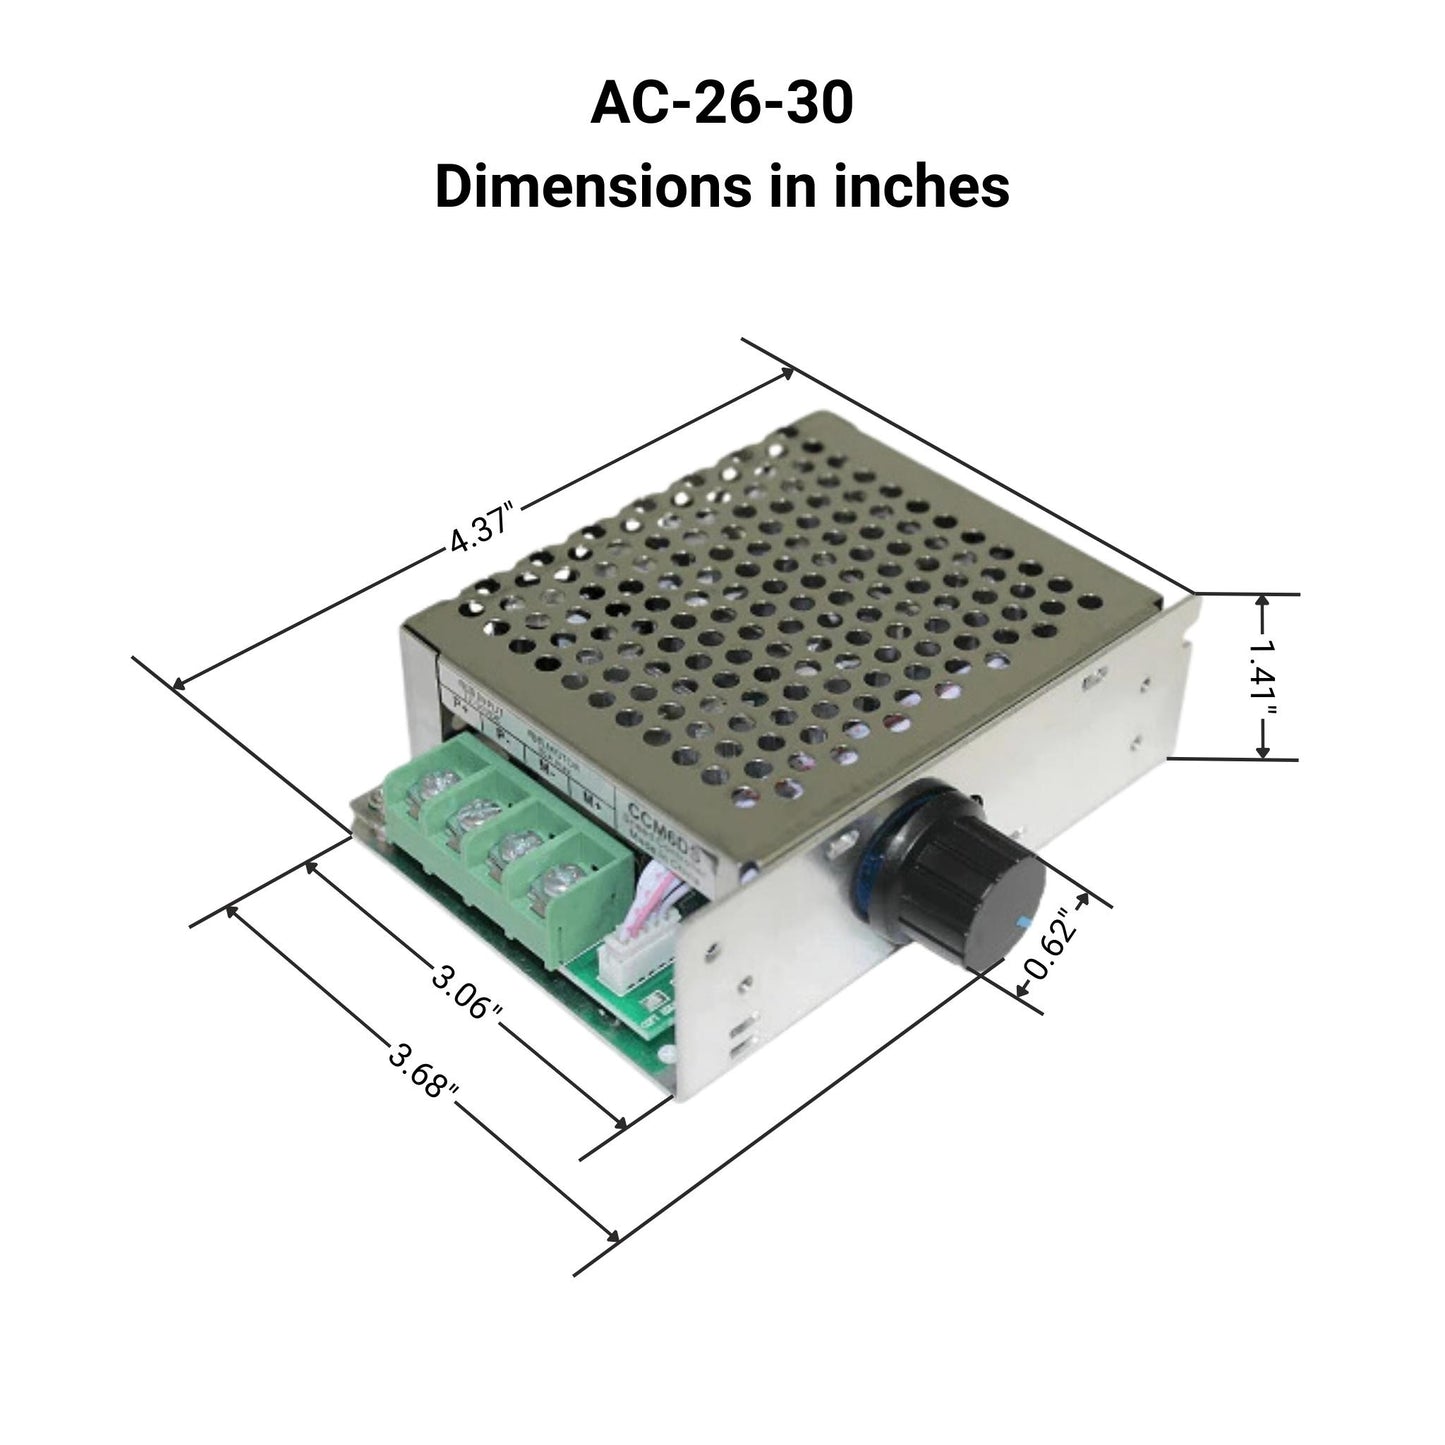 DC Speed Controller - 30A dimensions in inches